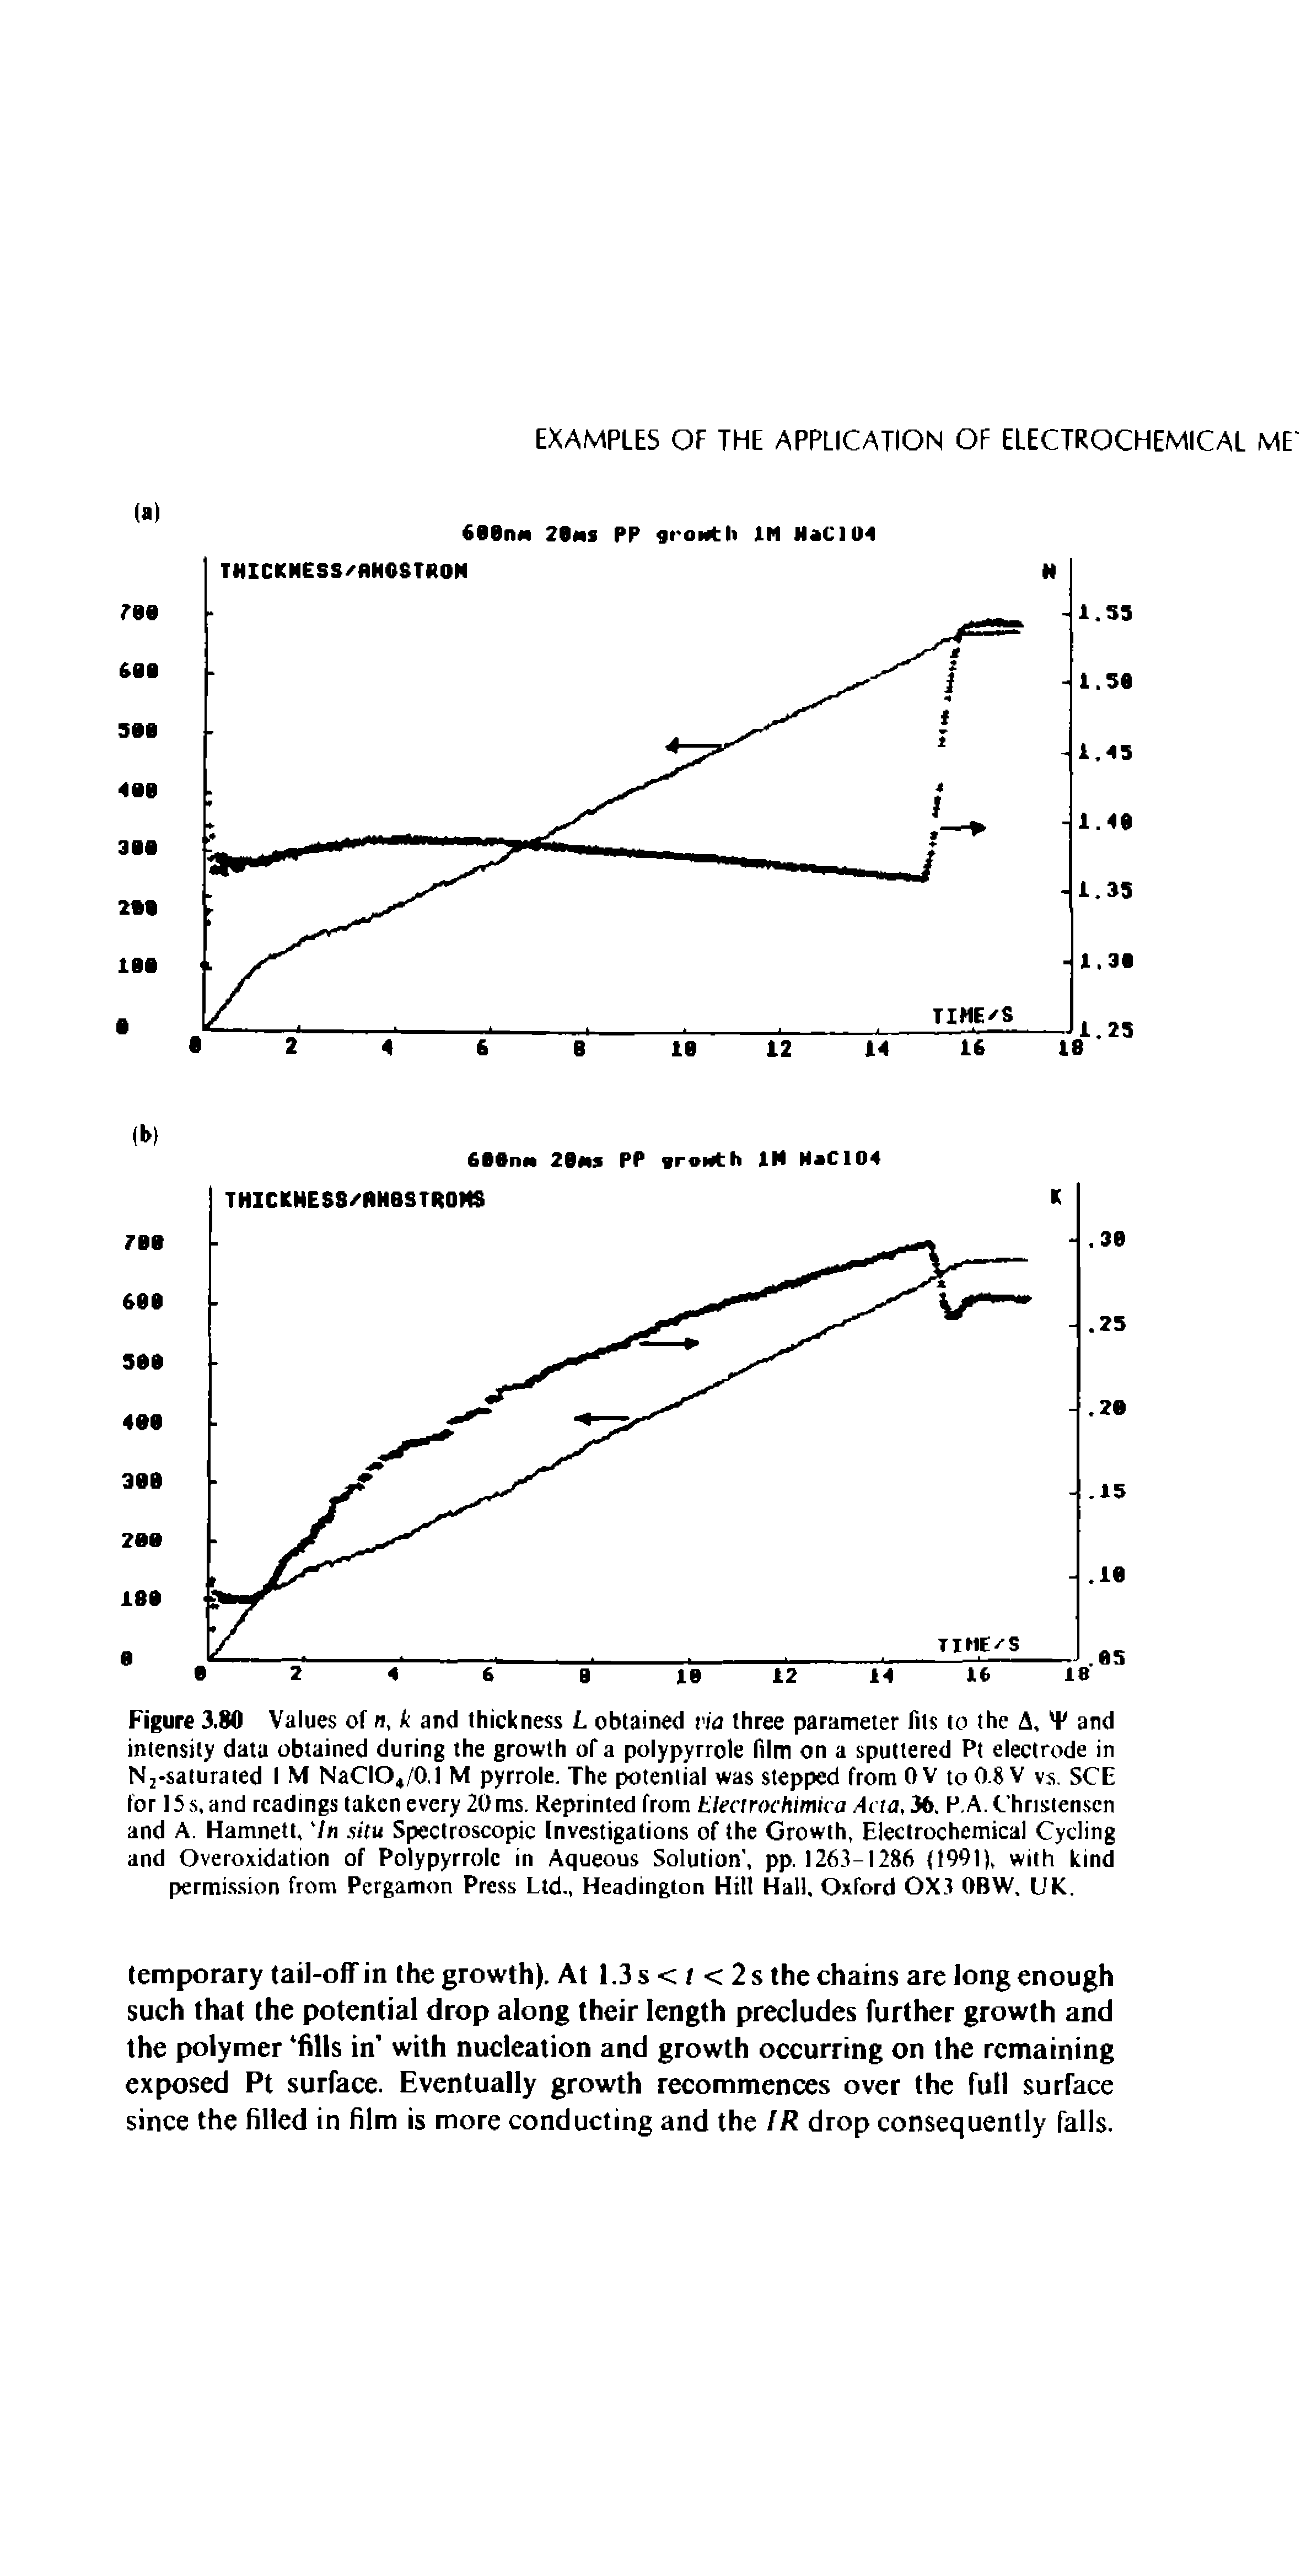 Figure 3.80 Values of n, k and thickness L obtained t ia three parameter fits to the A, T and intensity data obtained during the growth of a polypyrrole film on a sputtered Pt electrode in N2-saturated I M NaCIO4/0,l M pyrrole. The potential was stepped from OV to 0.8 V vs, SCE for 15 s, and readings taken every 20 ms. Reprinted from tkarochimica Acia, 36. P,A. Christensen and A. Hamnett, In situ Spectroscopic Investigations of the Growth, Electrochemical Cycling and Overoxidation of Polypyrrolc in Aqueous Solution, pp. 1263-1286 (1991), with kind permission from Pergamon Press Ltd., Headington Hill Hall. Oxford 0X3 OBW, UK.